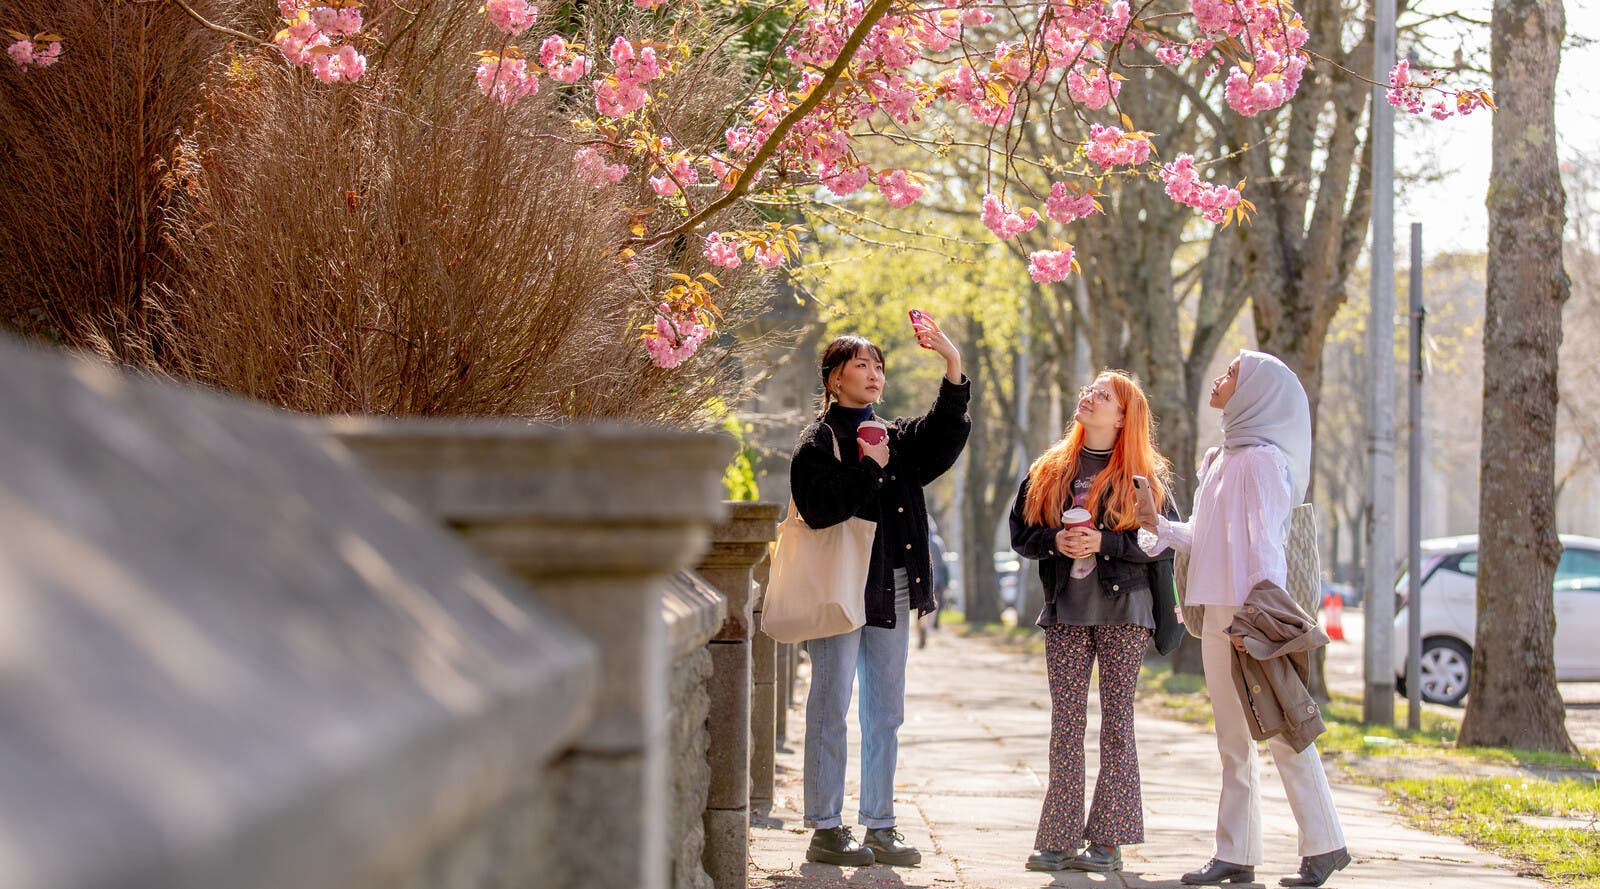 Students taking a photo underneath a blossoming tree